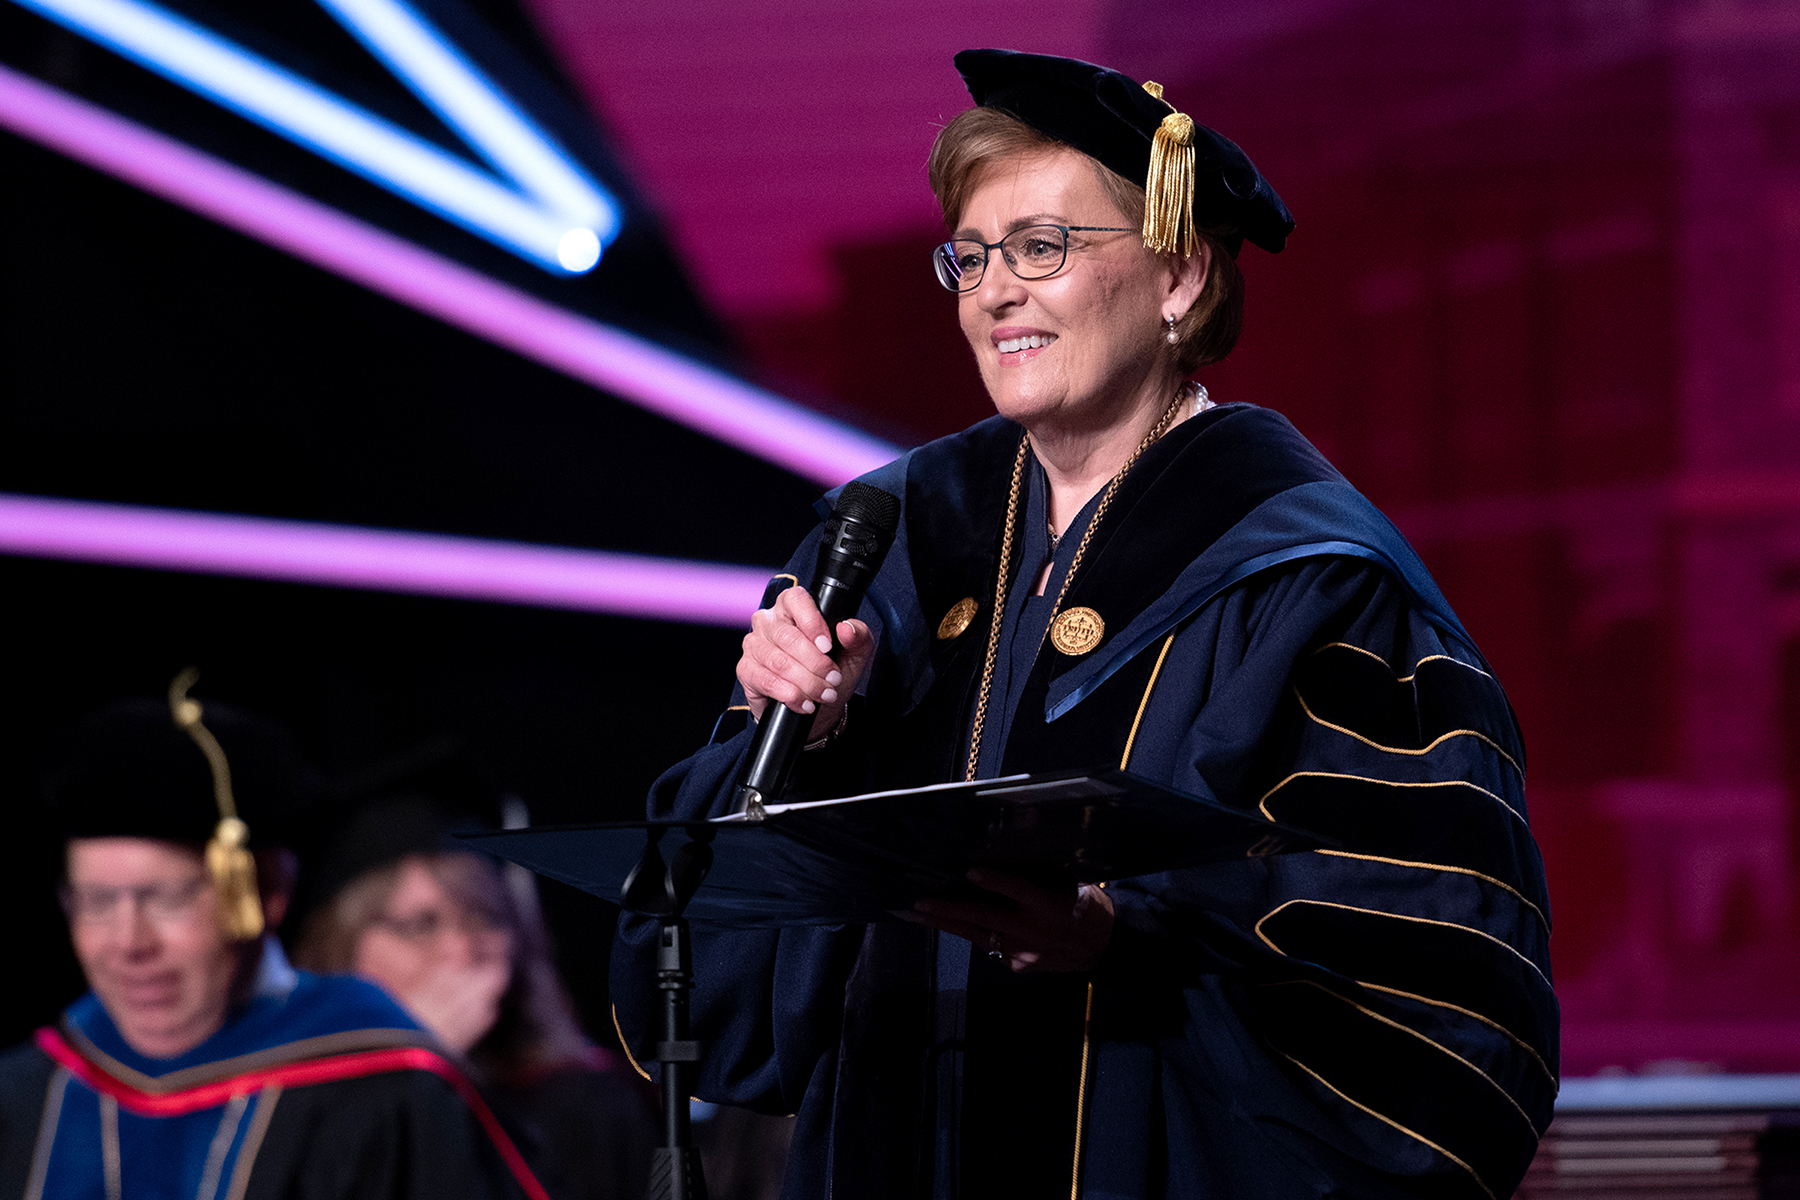 Commencement 2020 moved to August for Evangel University & AGTS